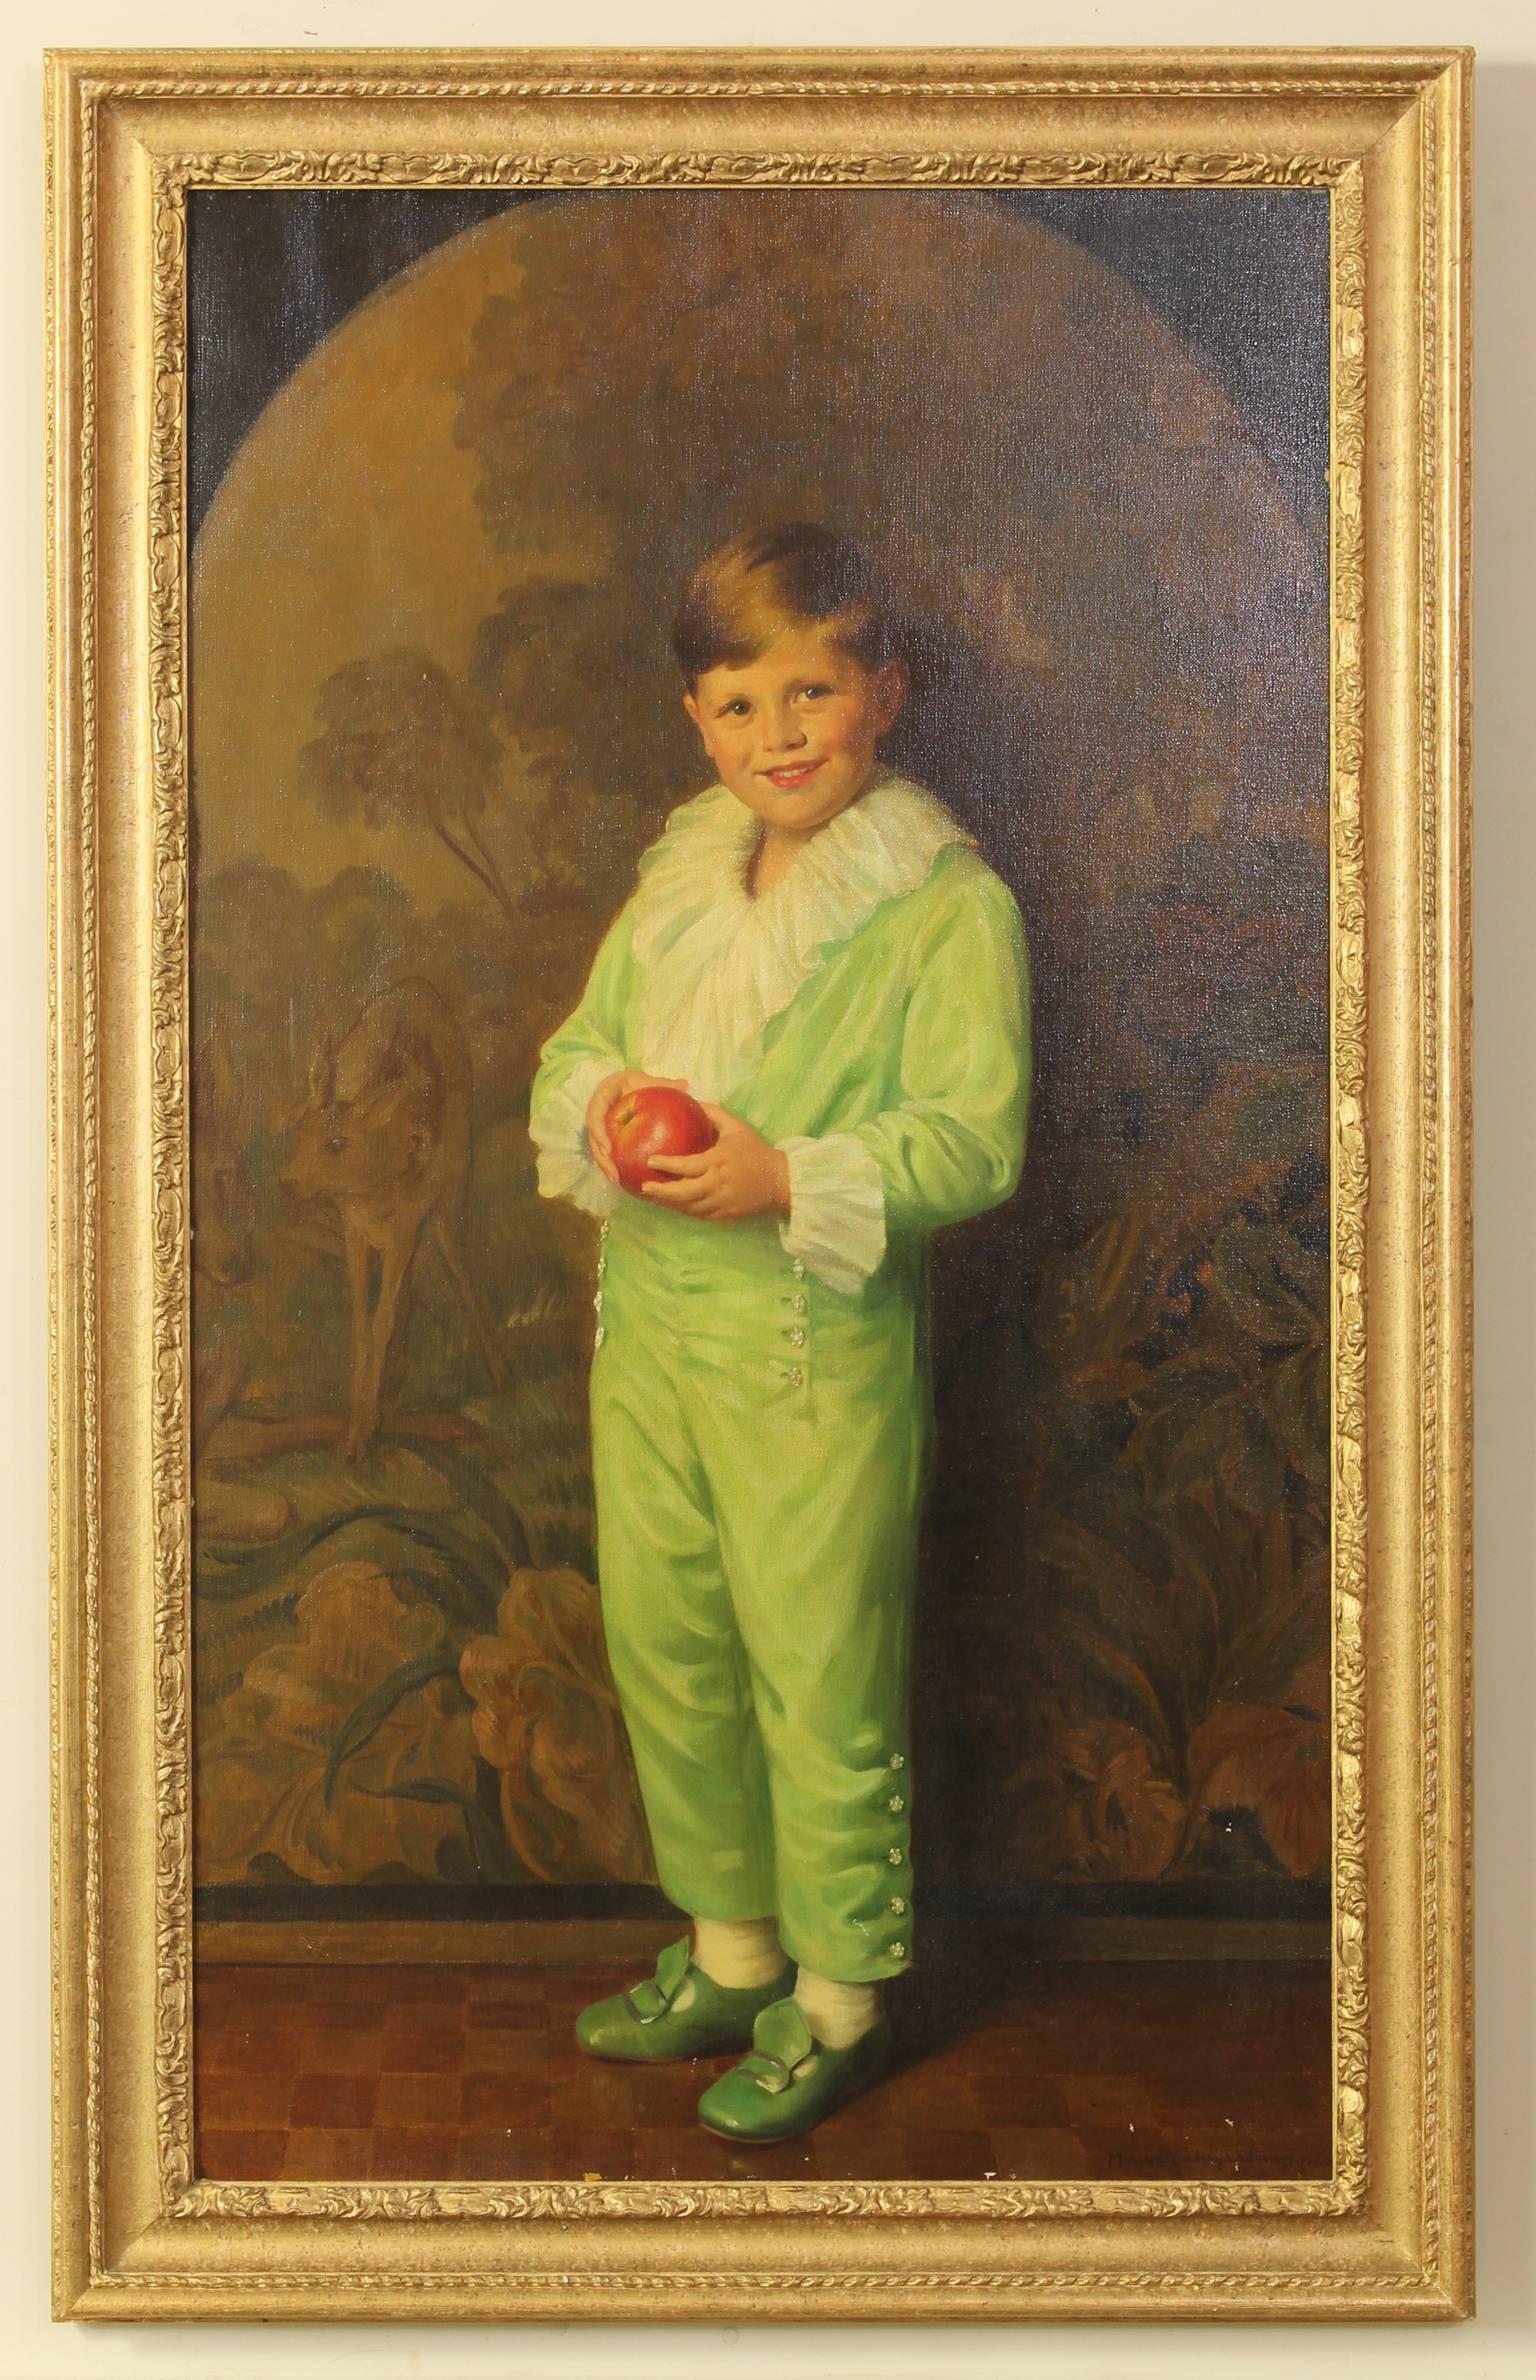 An outstanding life-size oil on canvas portrait of a young boy dressed as a page in a green silk costume holding an apple, signed and dated Margaret Lindsay Williams, 1930. (18 June 1888 - 4 June 1960). Williams, a celebrated portrait artist,